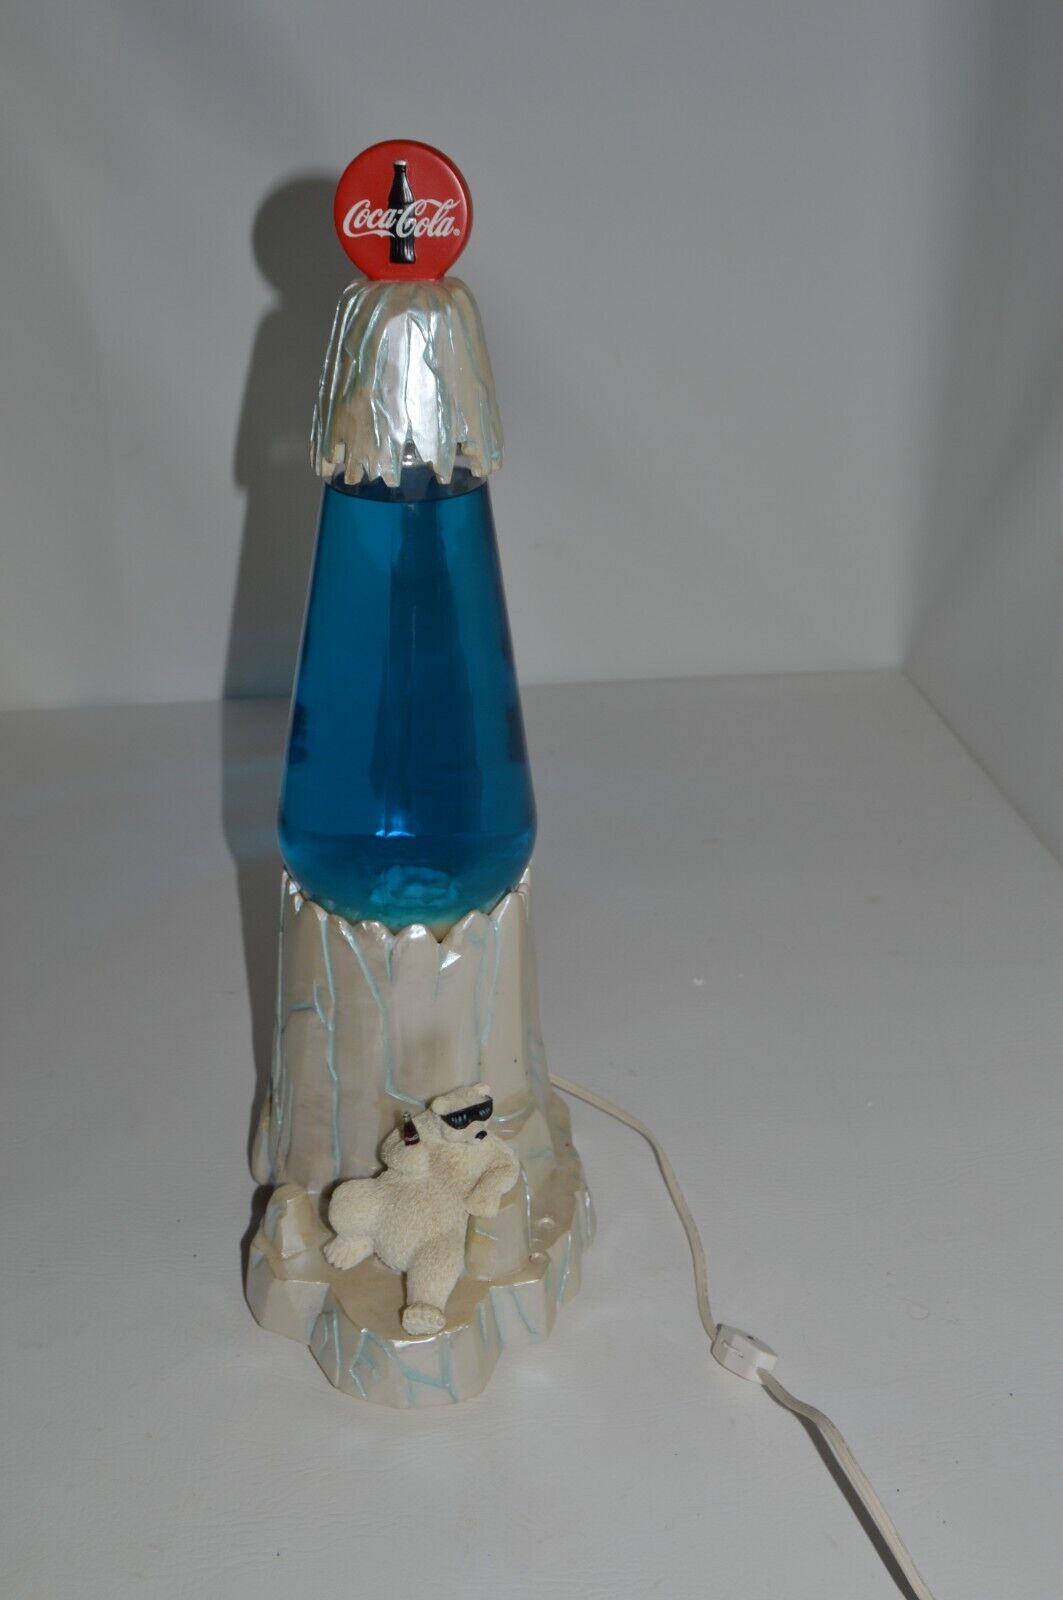 Coka Cola Lava lamp Vintage 1998 limited 7056 out of 10000